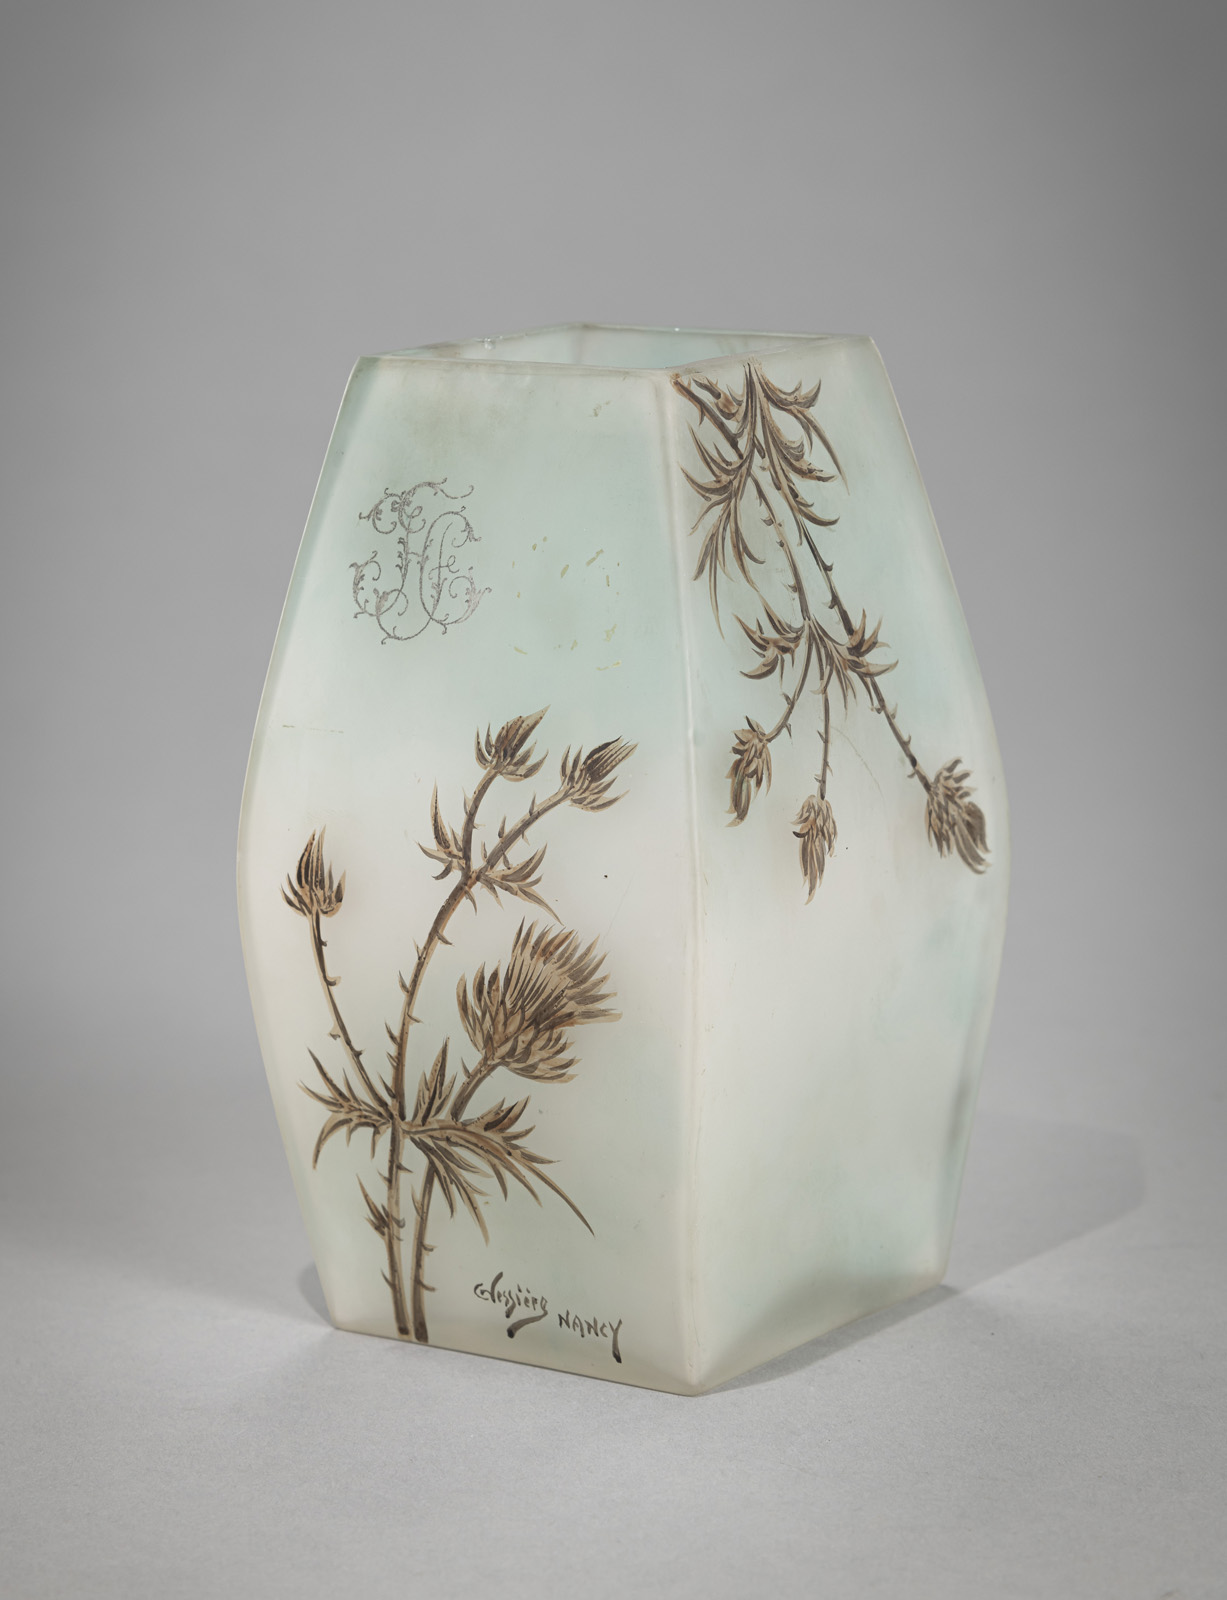 AN ENAMEL PAINTED THISTLE PATTERN GLASS VASE - Image 7 of 7